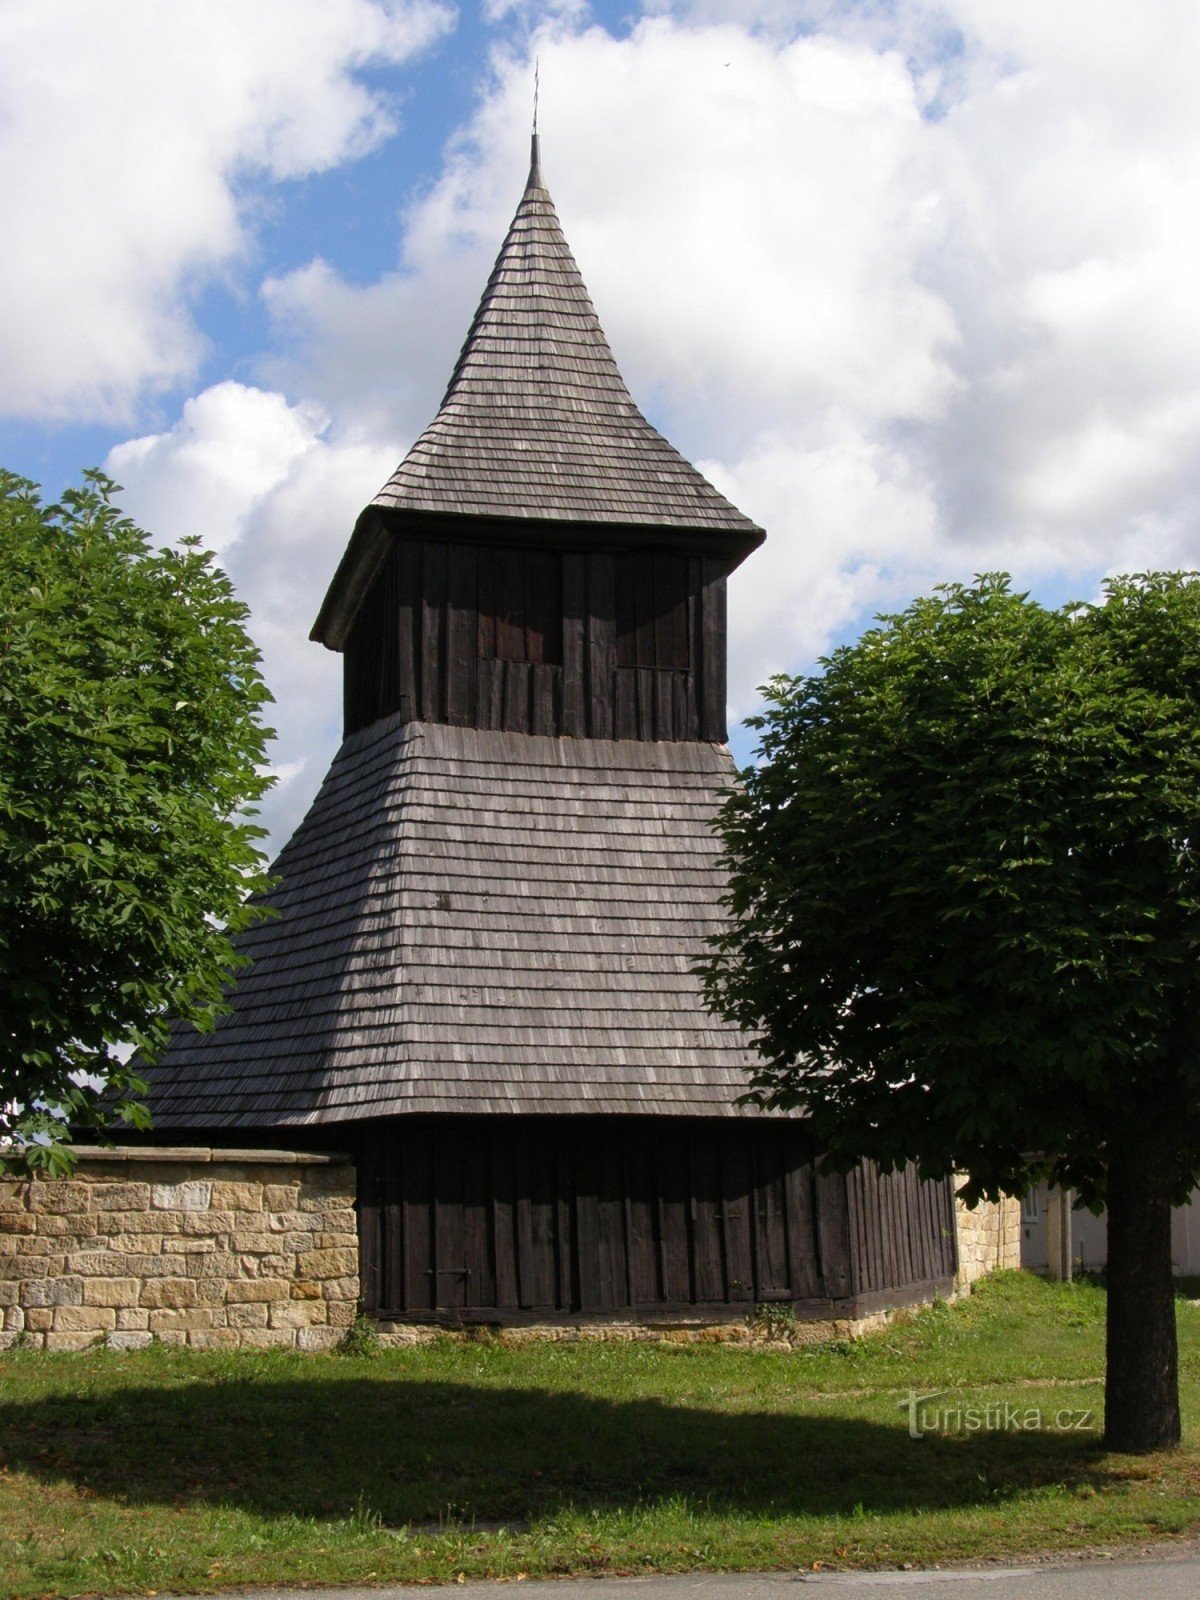 Vysočany - wooden church of St. Markets with a bell tower